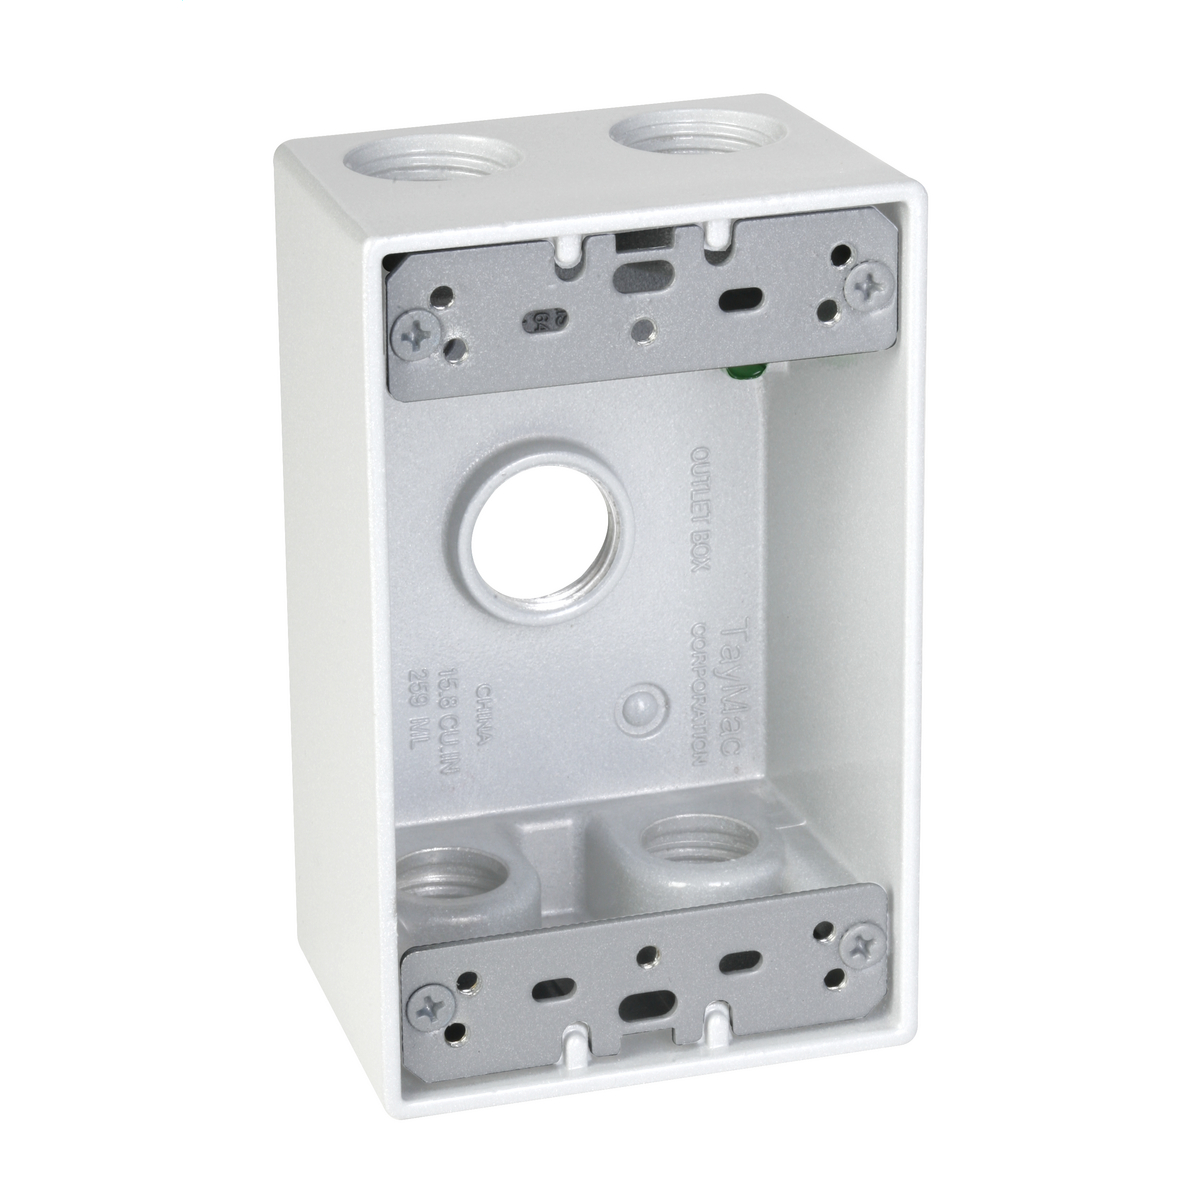 1G WP BOX (5) 1/2 IN. OUTLETS - WHITE